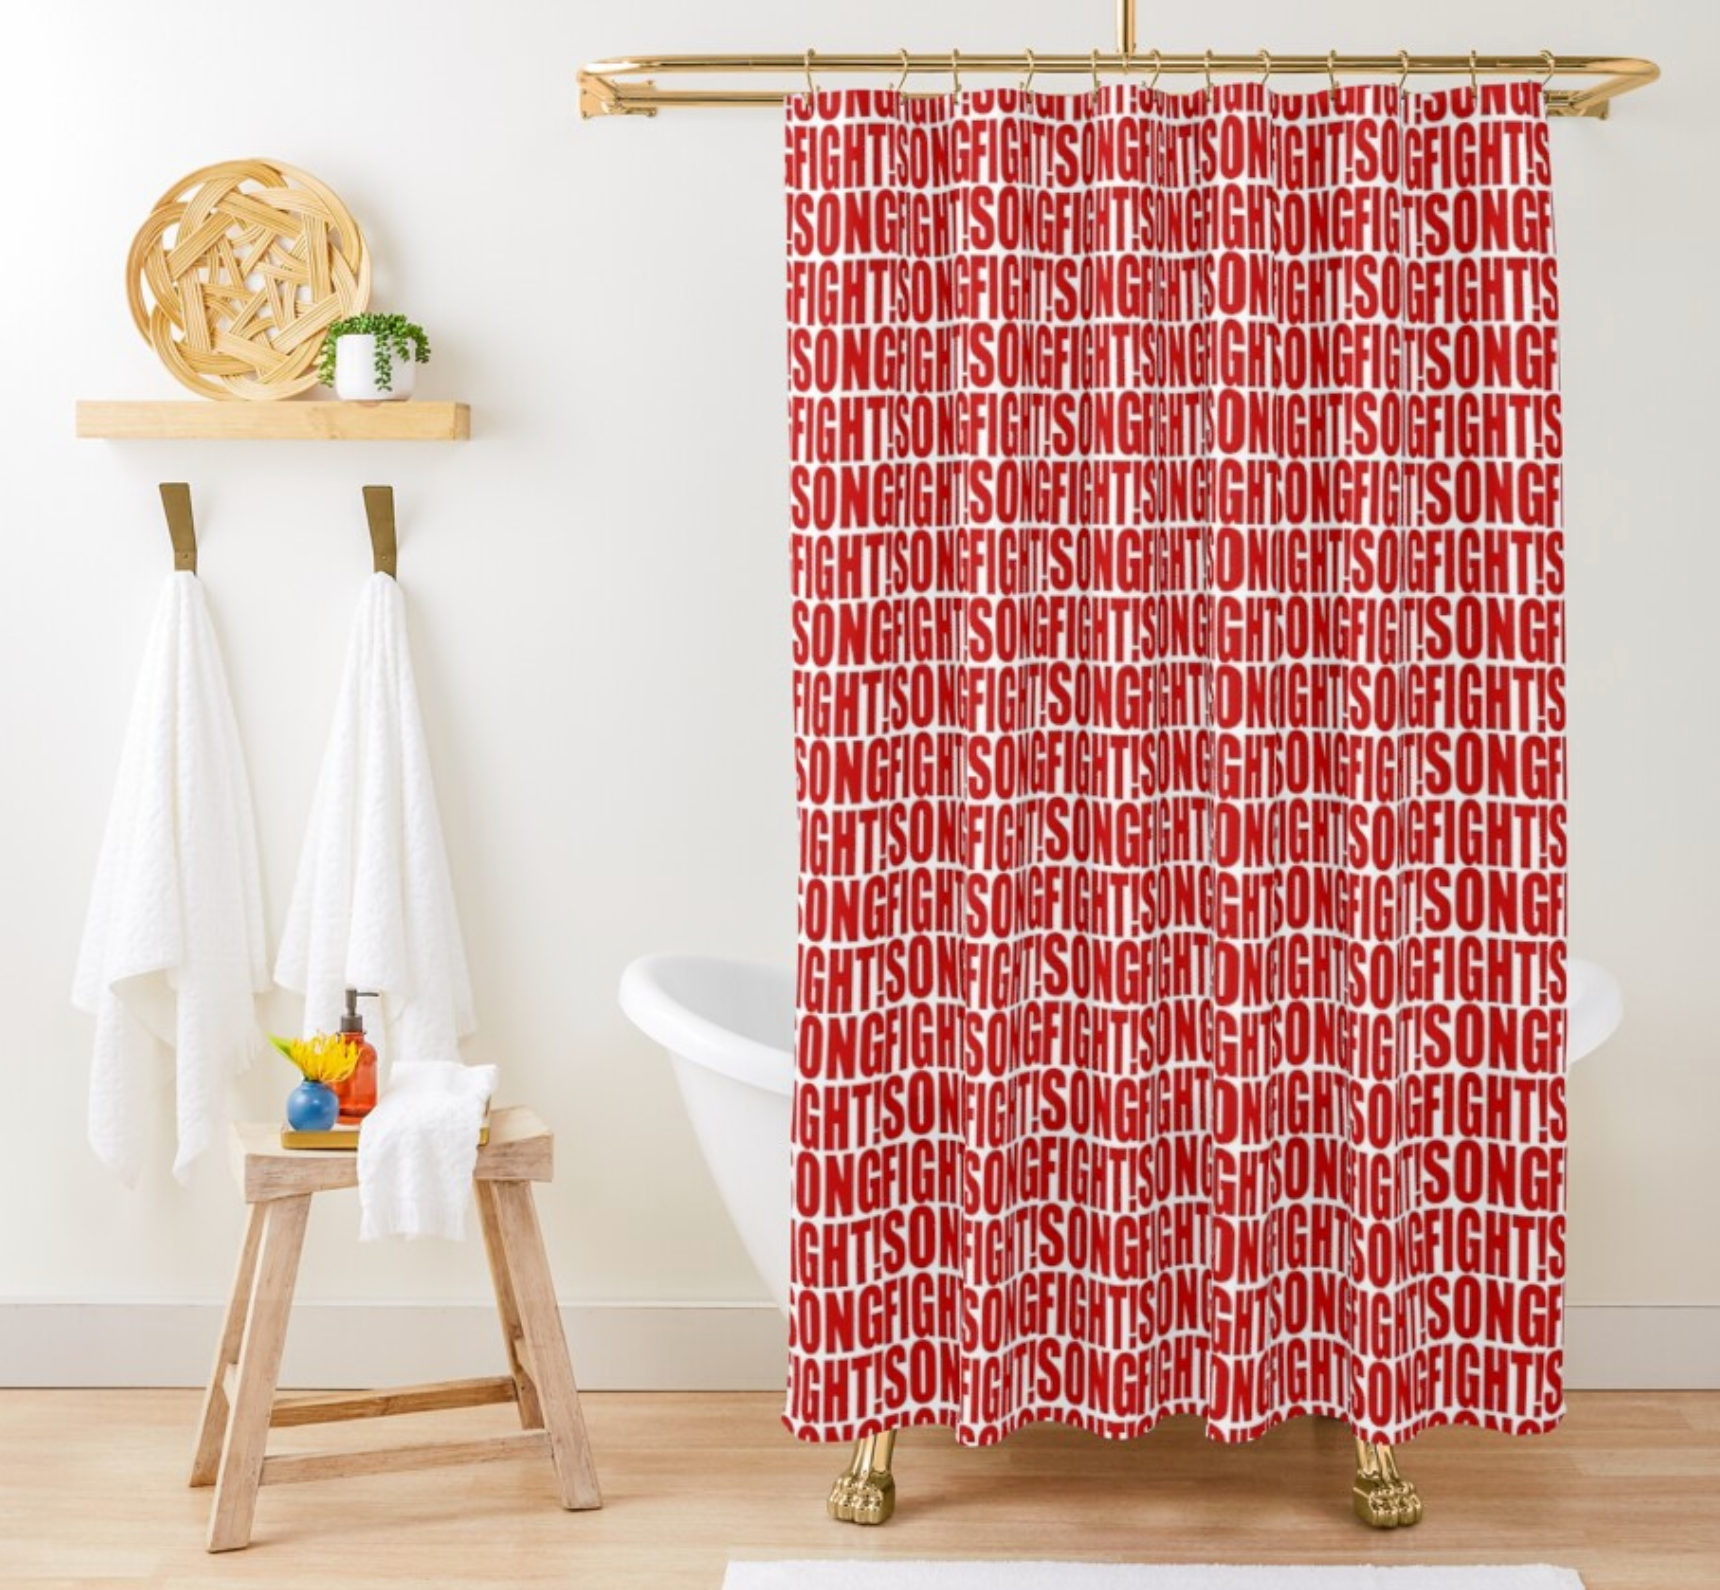 _Song_Fight___Shower_Curtain_by_a1phab3t___Redbubble.png